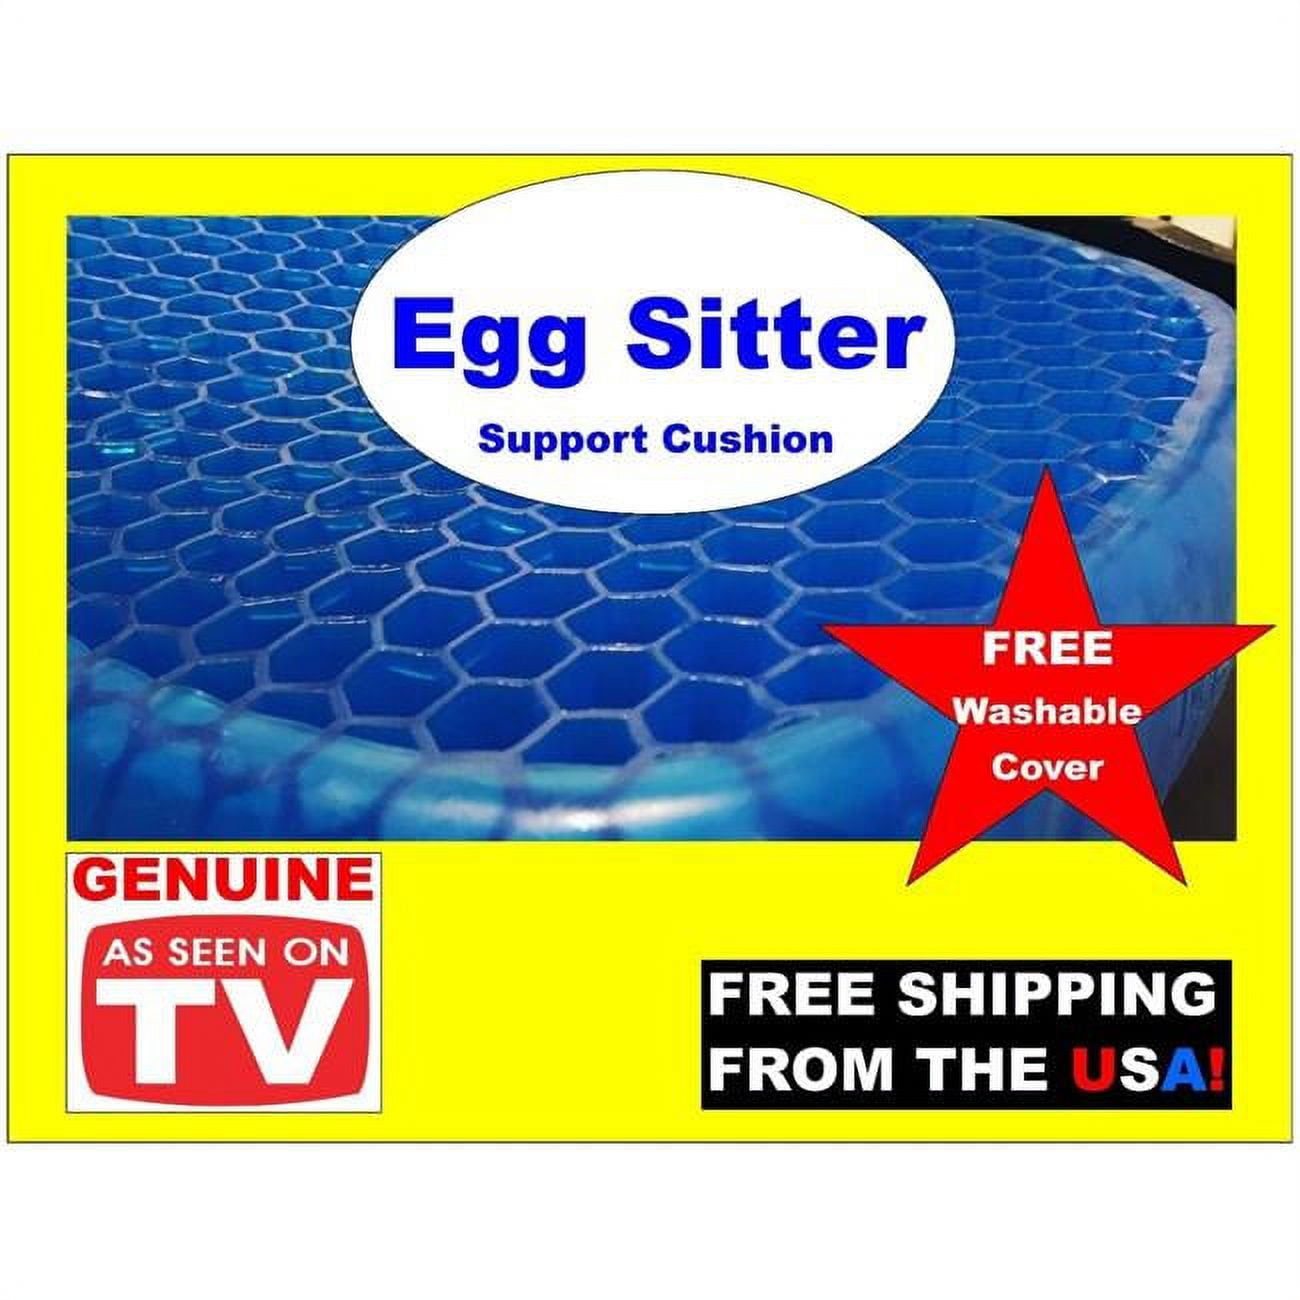 As Seen On TV Egg Sitter Support Cushion